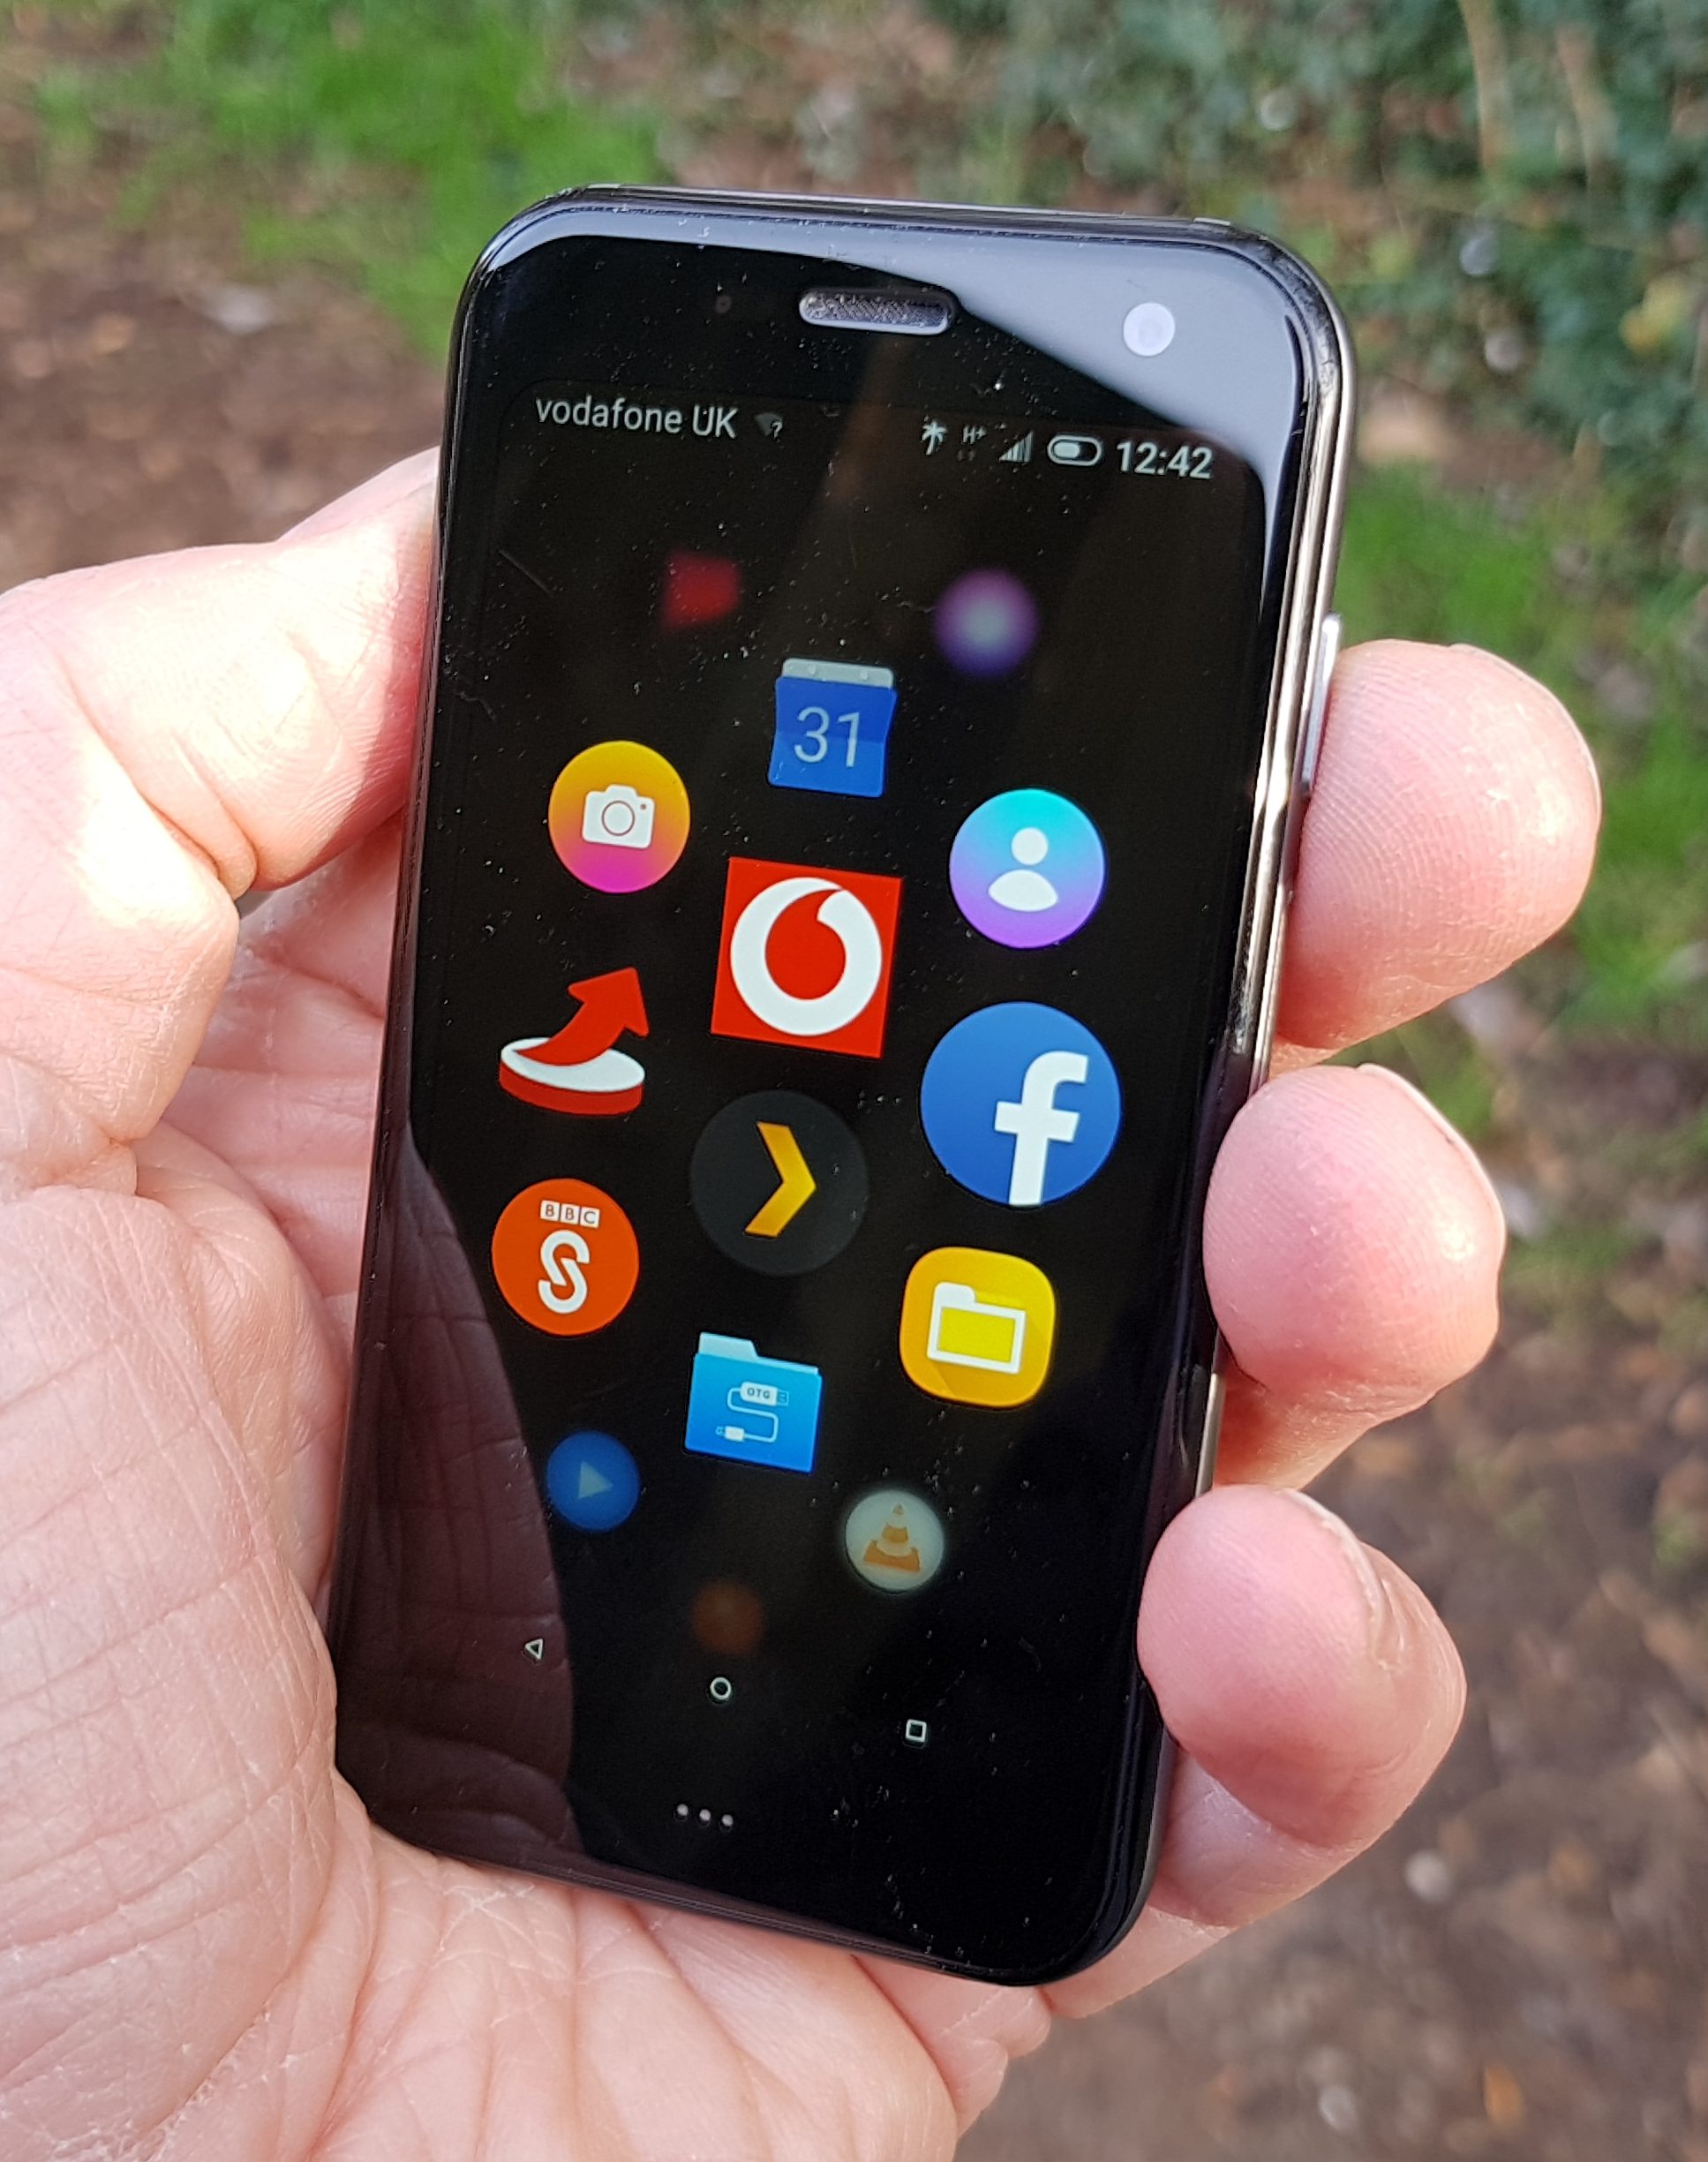 Palm - My thoughts on the mini-smartphone - Coolsmartphone